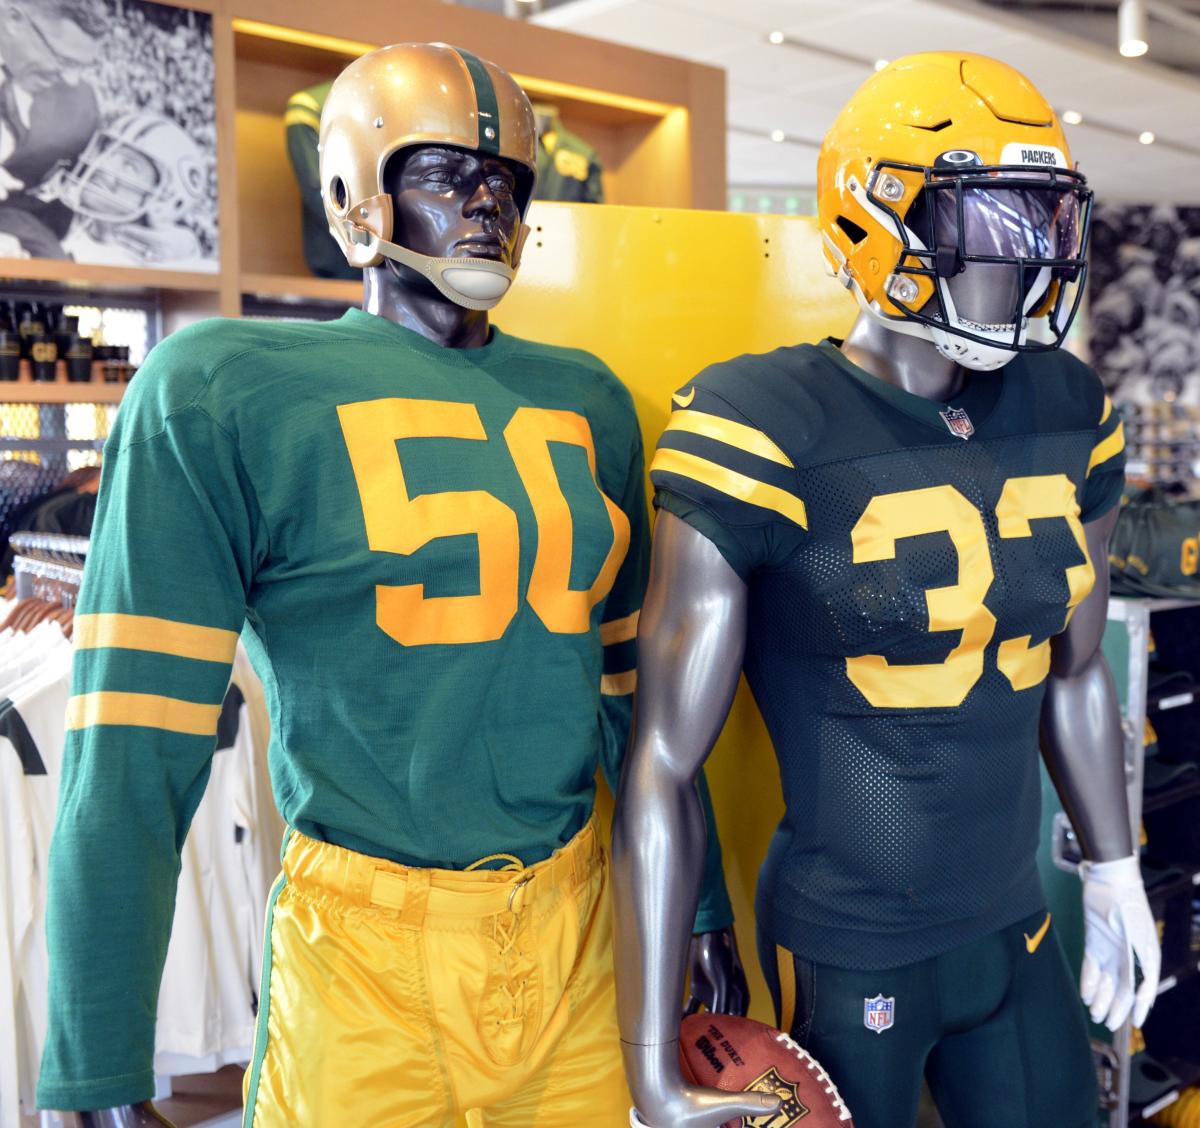 Packers in throwback 1950s uniform today vs Washington: Twitter reacts